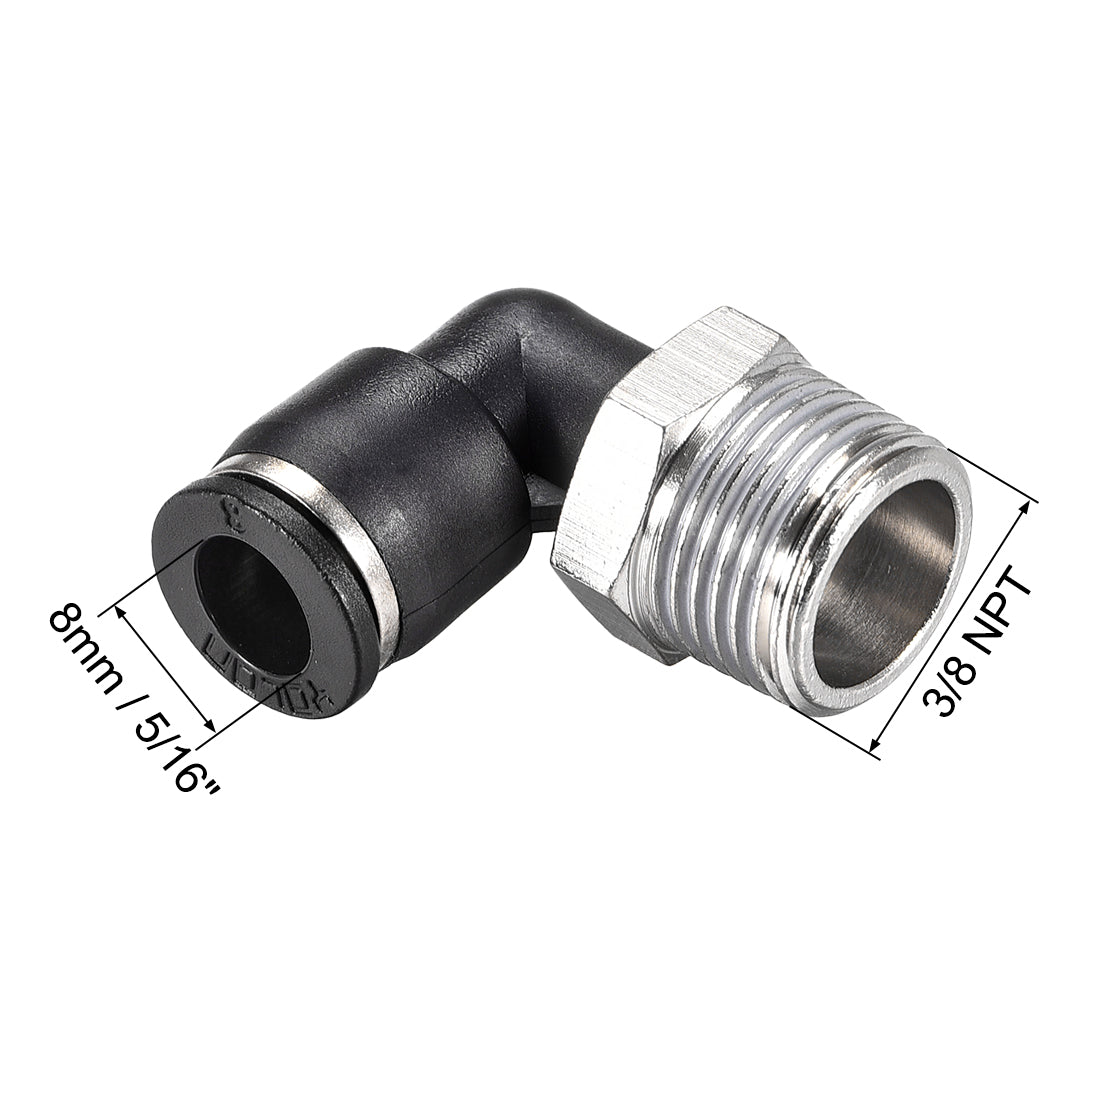 uxcell Uxcell Push to Connect Tube Fitting Male Elbow 8mm Tube OD x 3/8 NPT Thread Pneumatic Air Push Fit Lock Fitting 2pcs